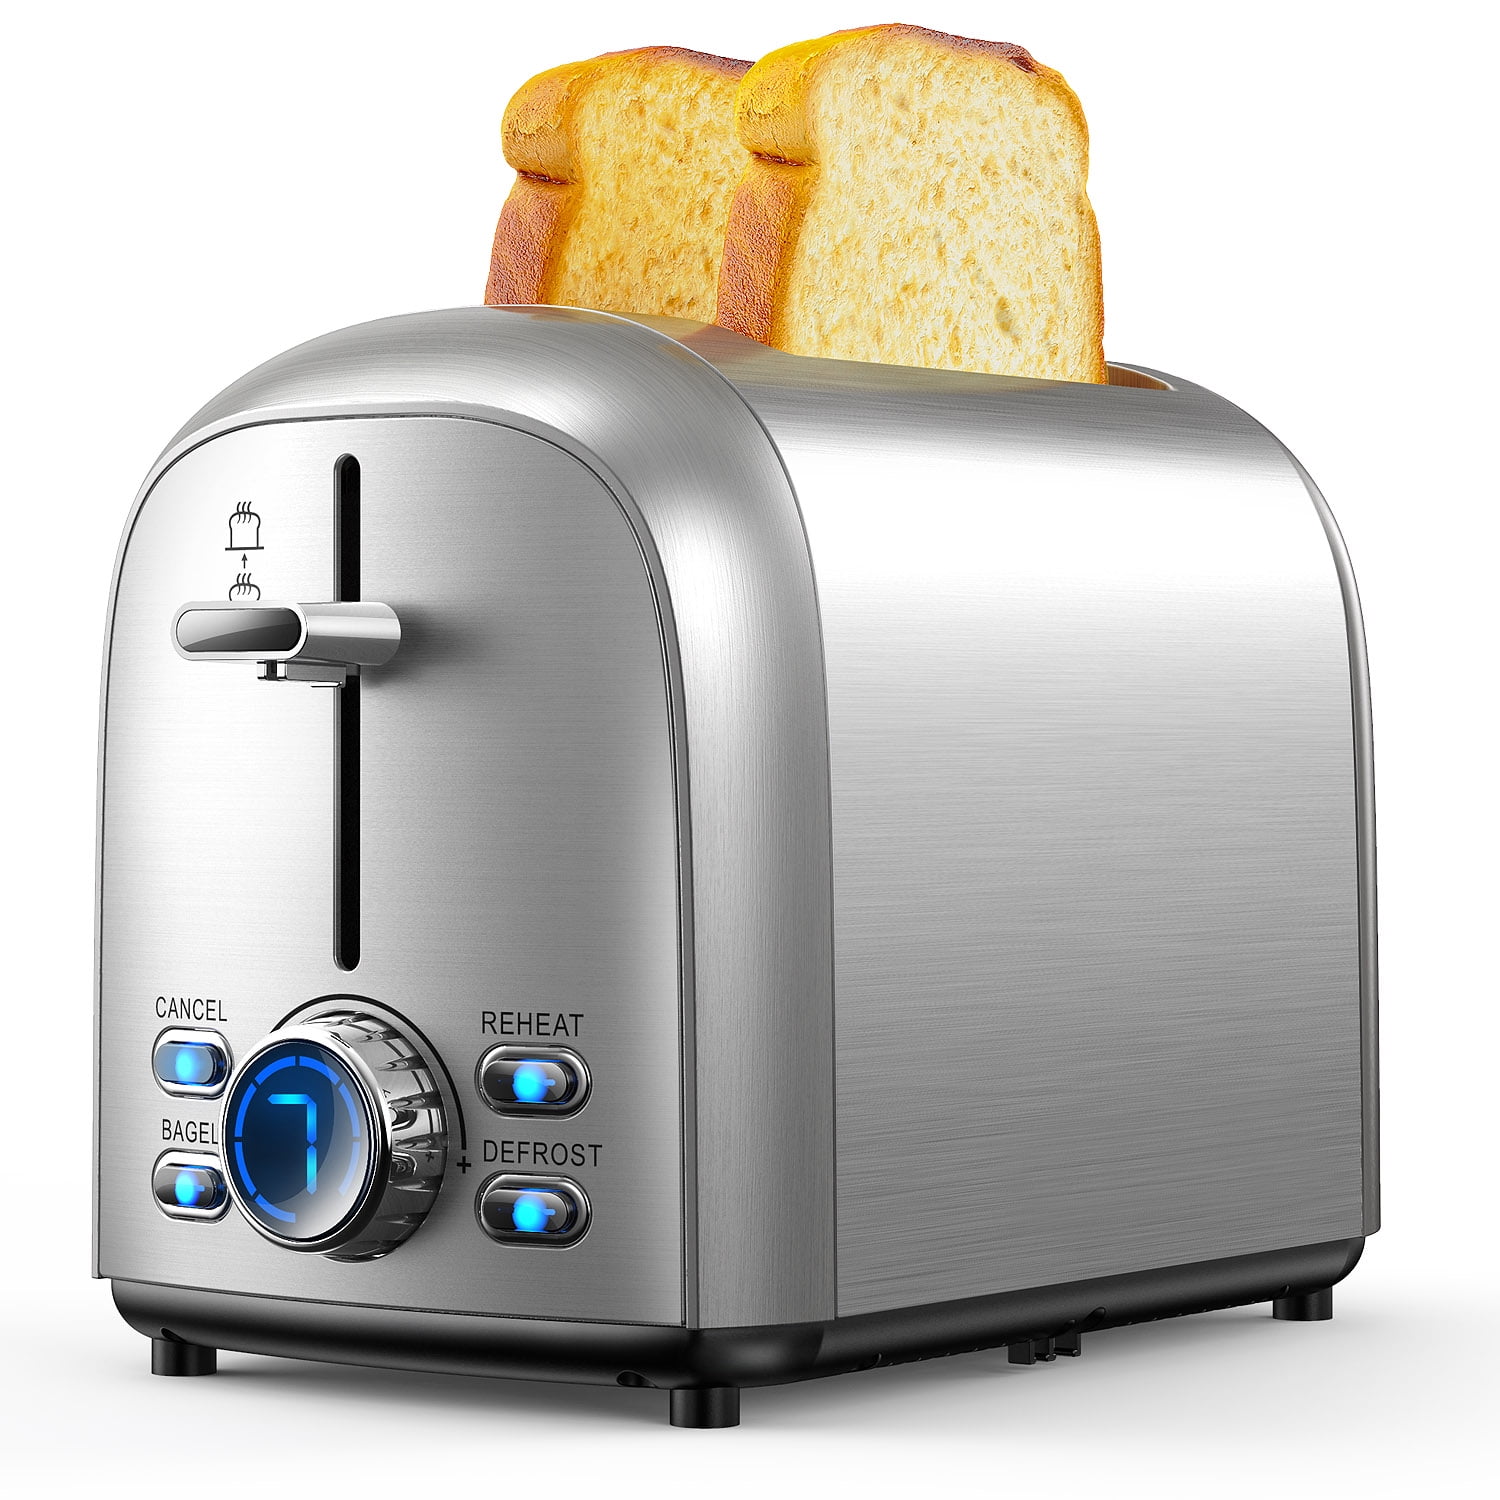 Keenstone White Toaster, Retro 2 Slice Stainless Steel Toaster with Cancel,  Defrost Fuction for Bread, Bagel, Wide Slots Revolution Toasters, Kitchen  Appliances, Apartment Essentials Must Haves 